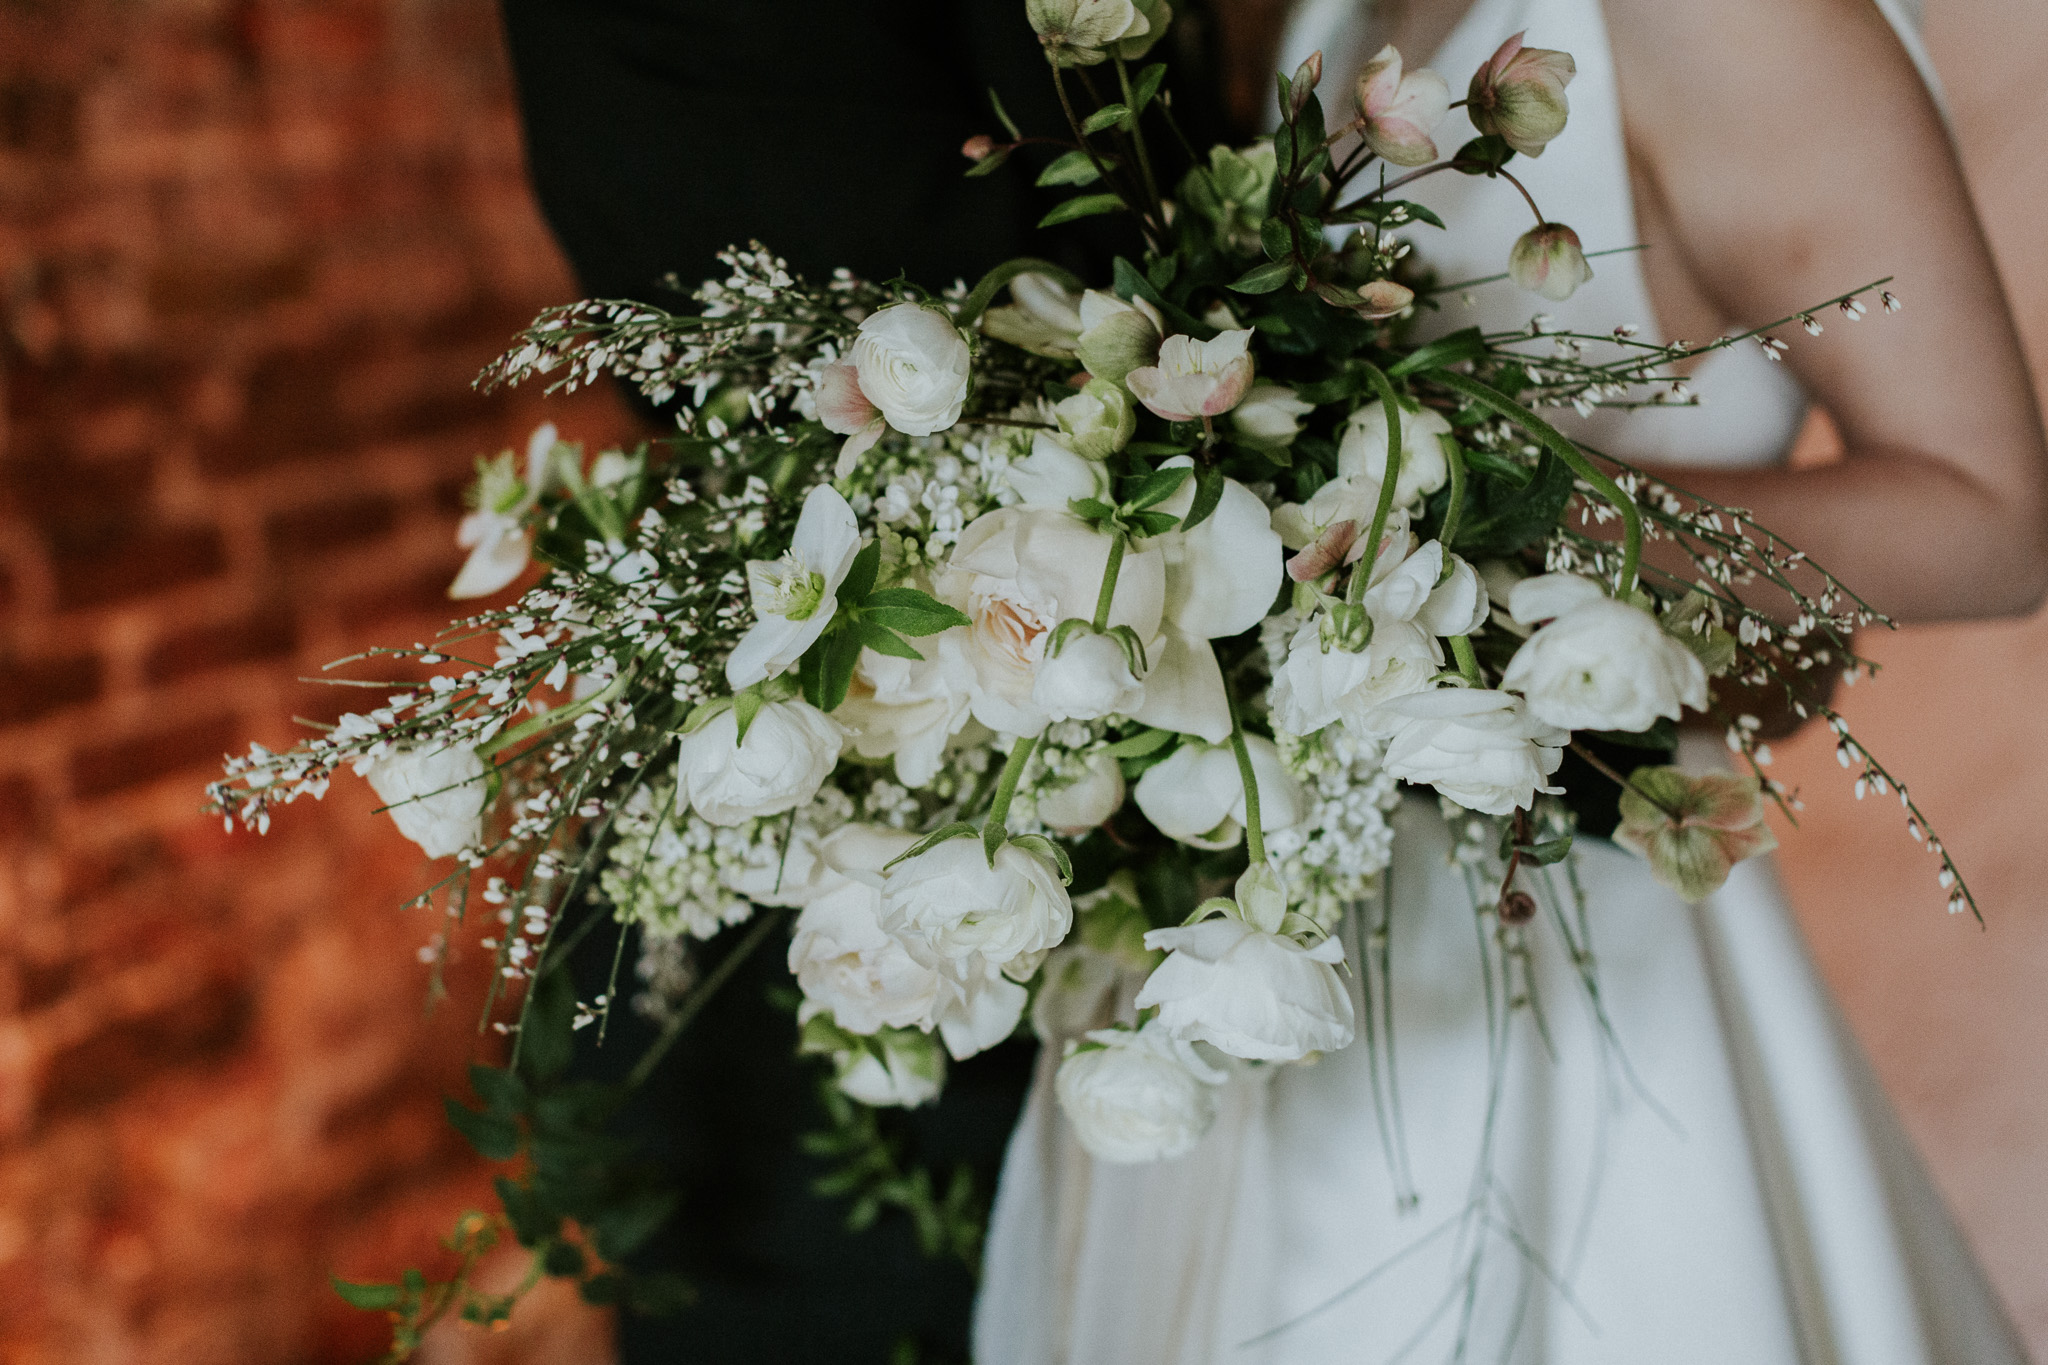 Wild, natural, organic wedding flowers by Leigh Chappell